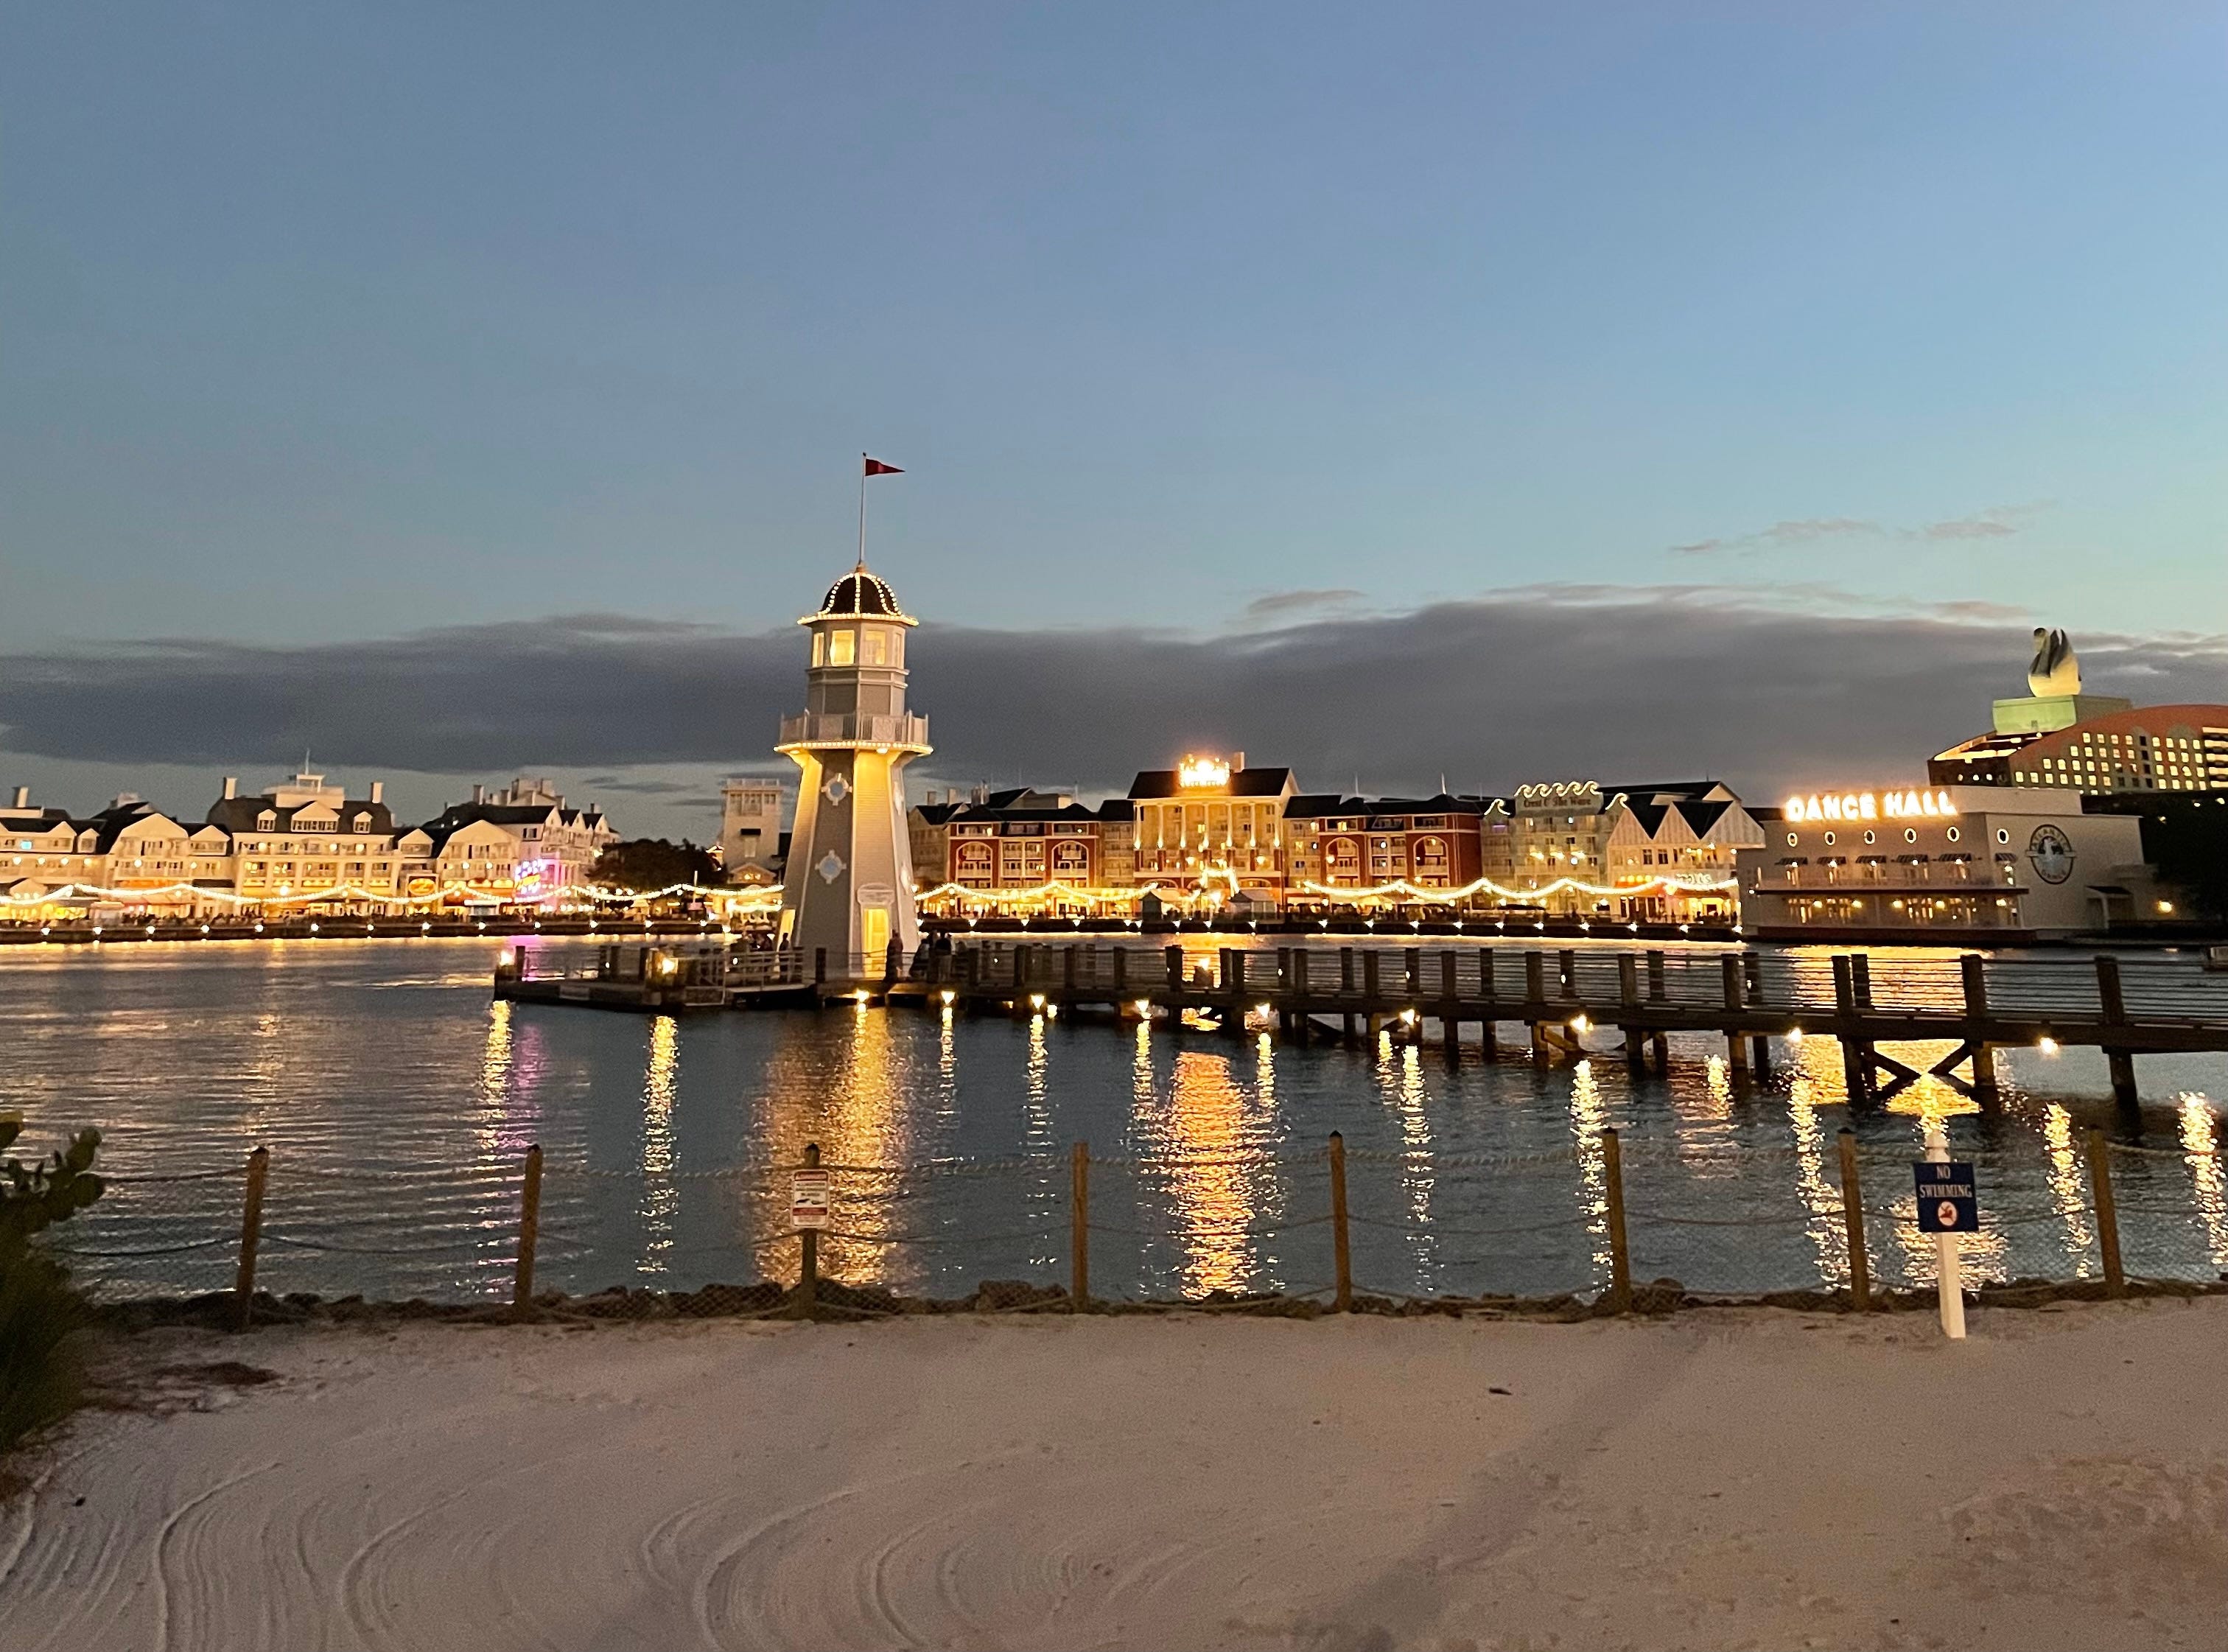 <p>The BoardWalk features midway games, evening performers, and a number of restaurants and bars. You don't need a theme-park ticket to check it out, either. </p>